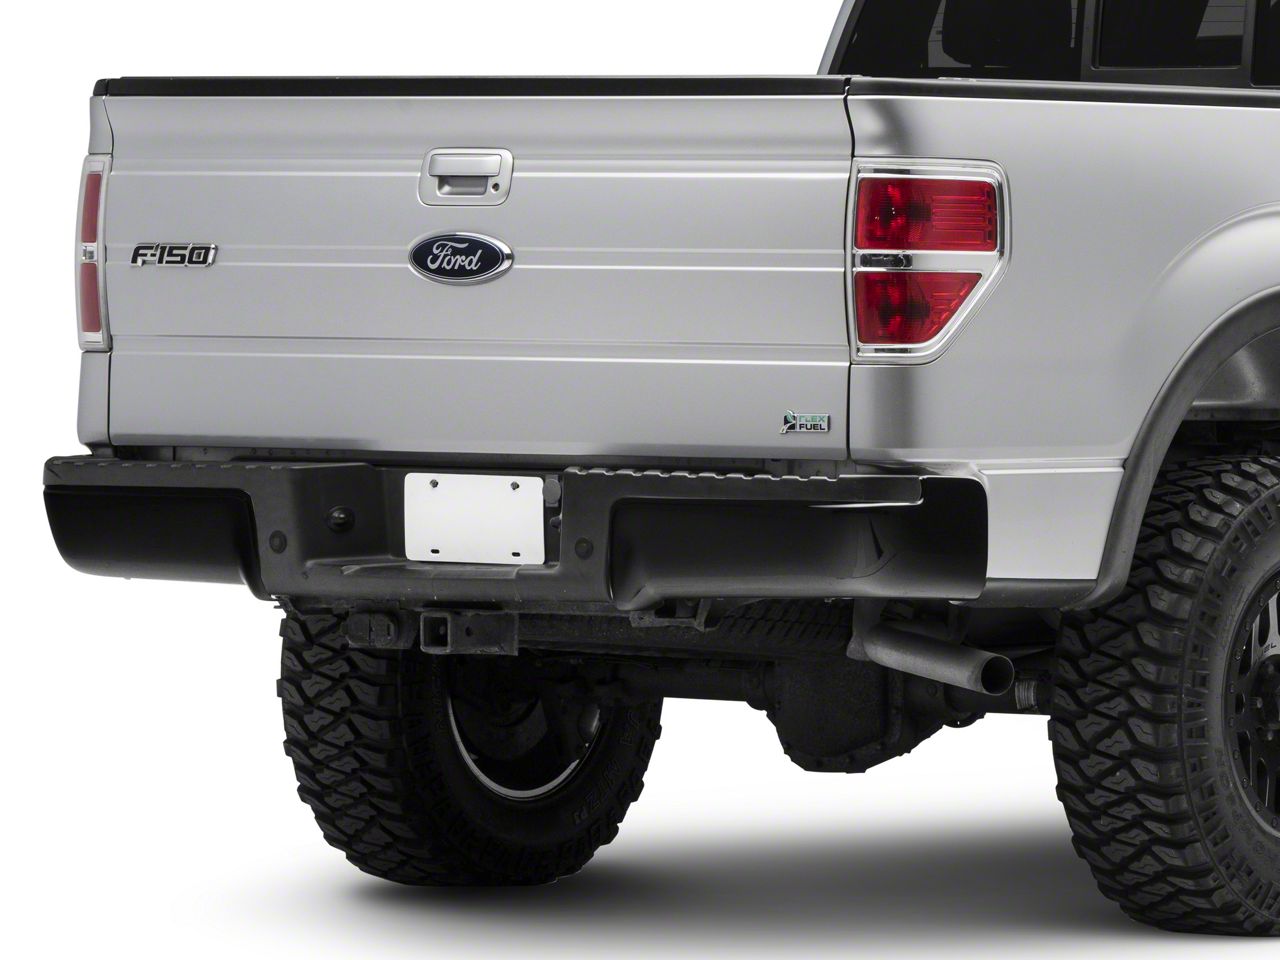 For 2009-2014 Ford F-150 New BumperShellz Paintable ABS Rear Bumper Cover 